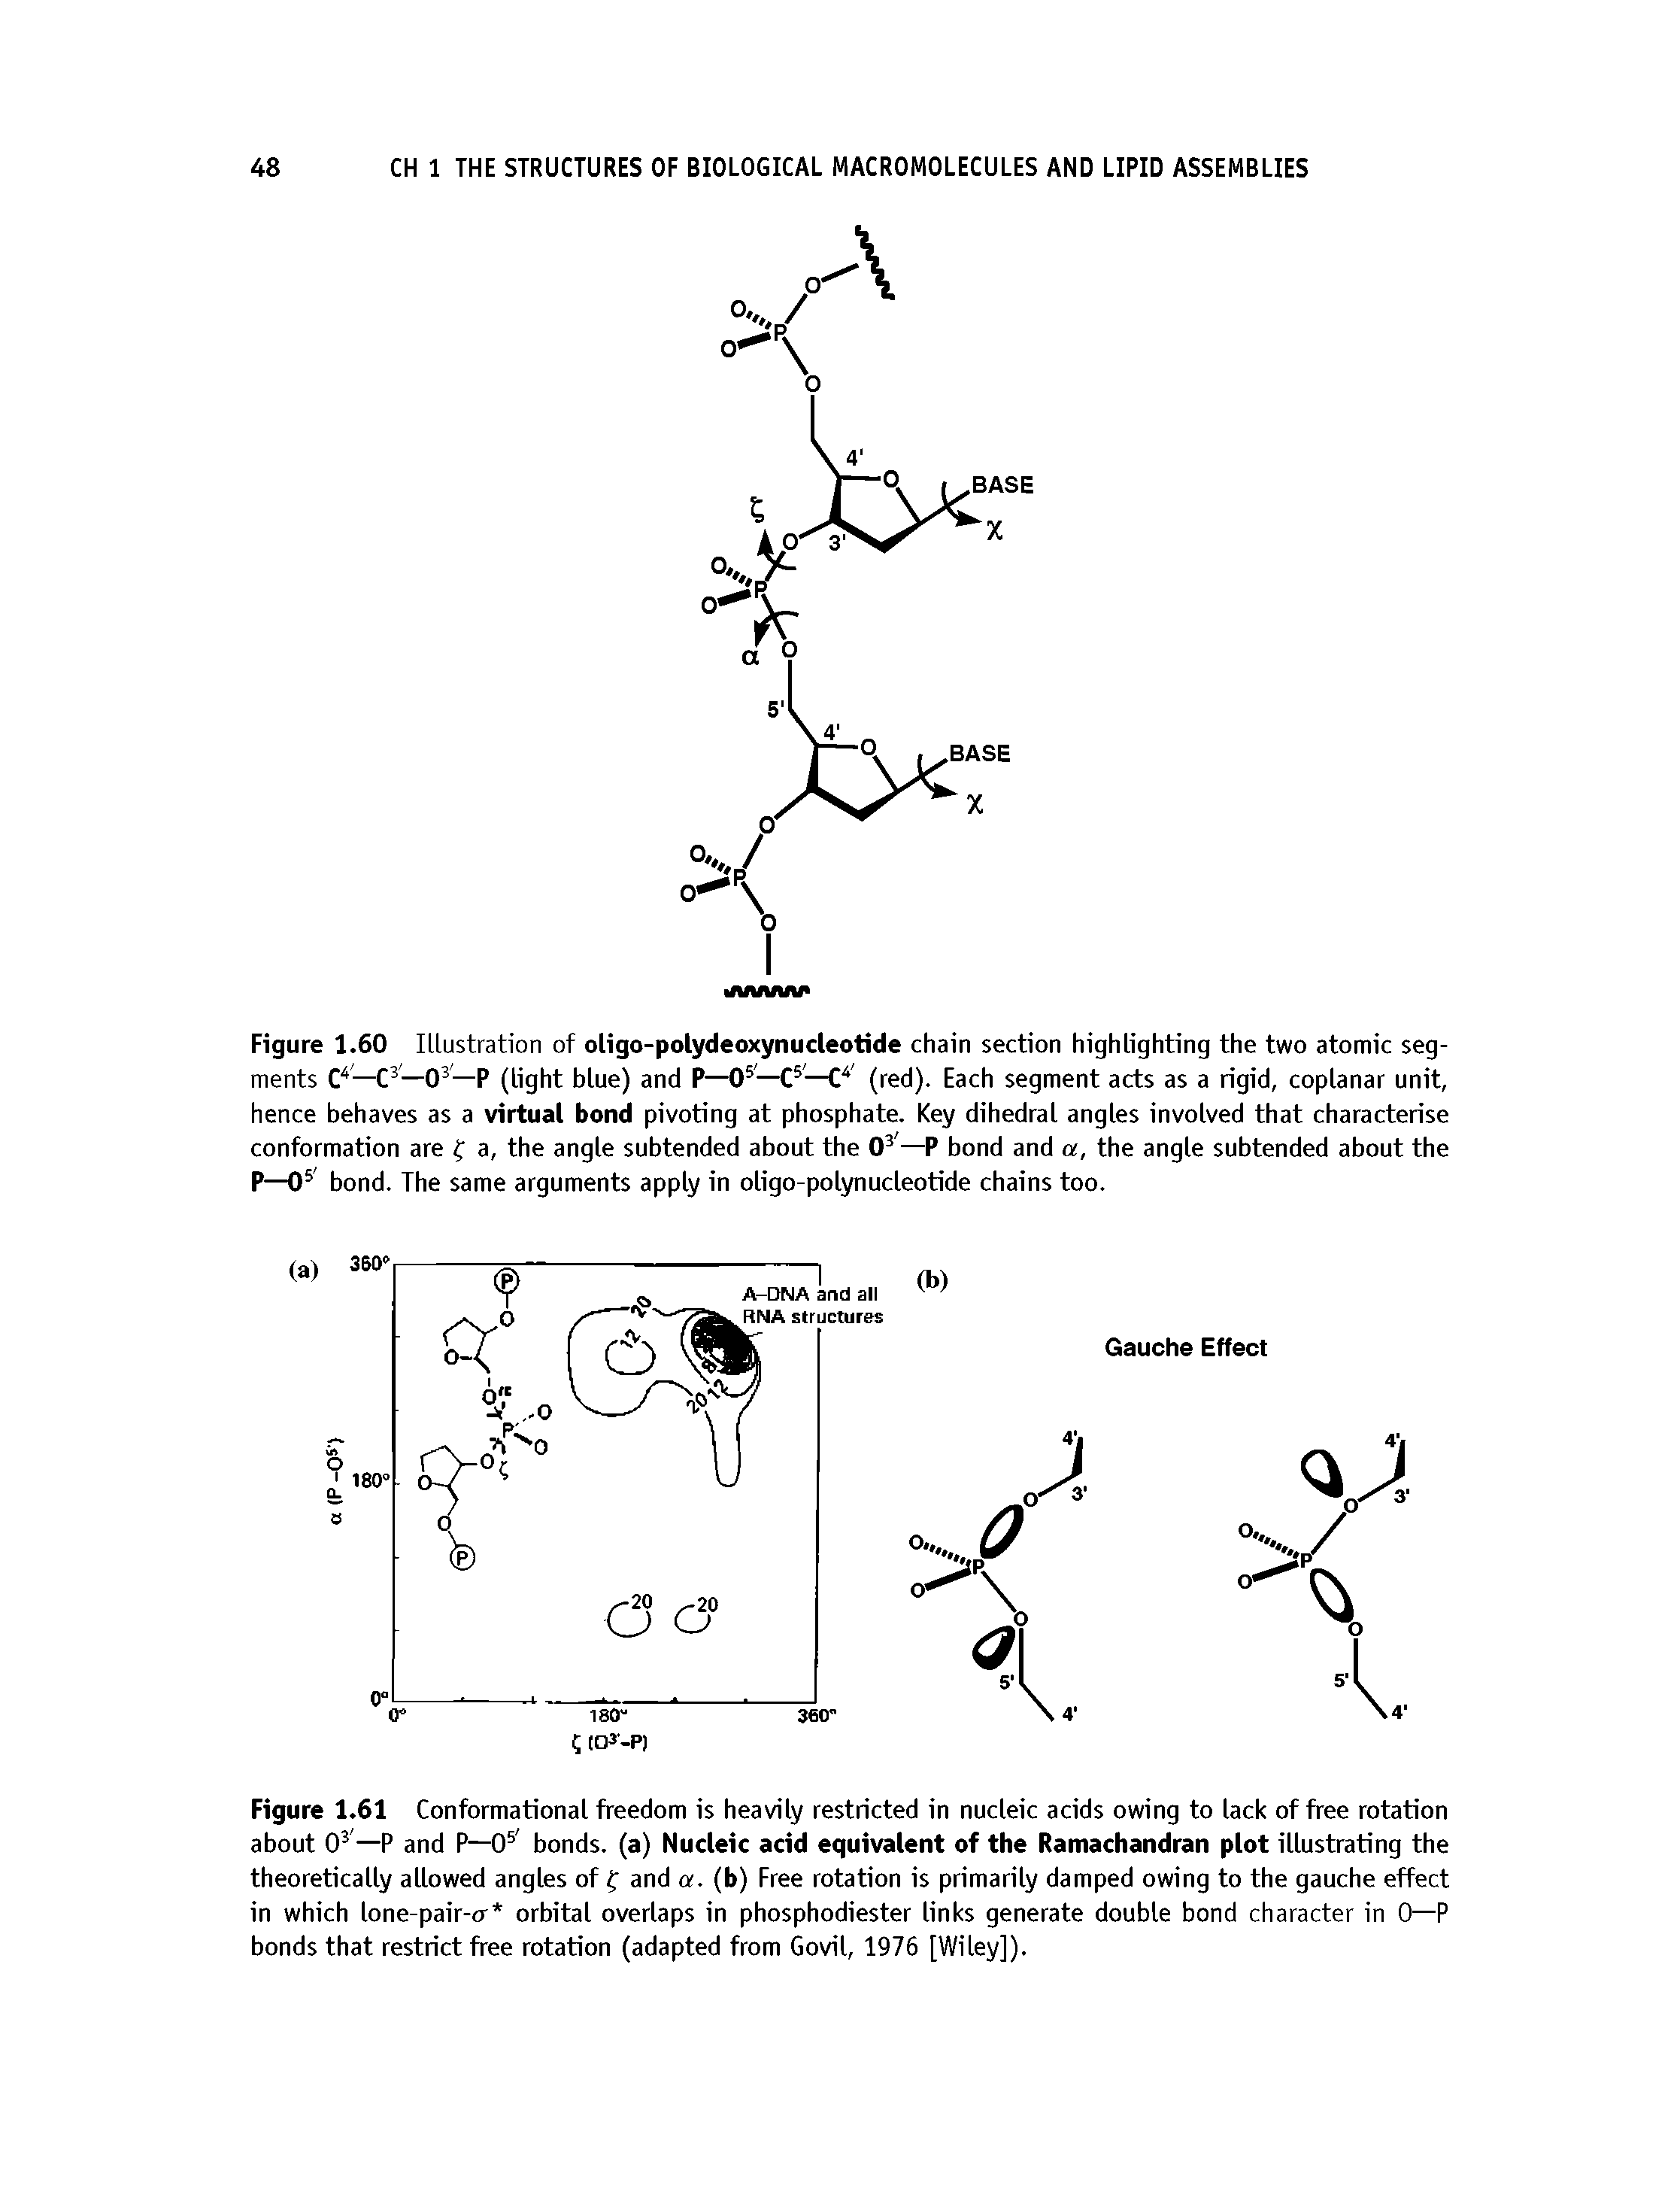 Figure 1.61 Conformational freedom is heavily restricted in nucleic acids owing to lack of free rotation about 0 —P and P—0 bonds, (a) Nucleic acid equivalent of the Ramachandran plot illustrating the theoretically allowed angles of C and a. (b) Free rotation is primarily damped owing to the gauche effect in which lone-pair-o- orbital overlaps in phosphodiester links generate double bond character in 0—P bonds that restrict free rotation (adapted from Govil, 1976 [Wiley]).